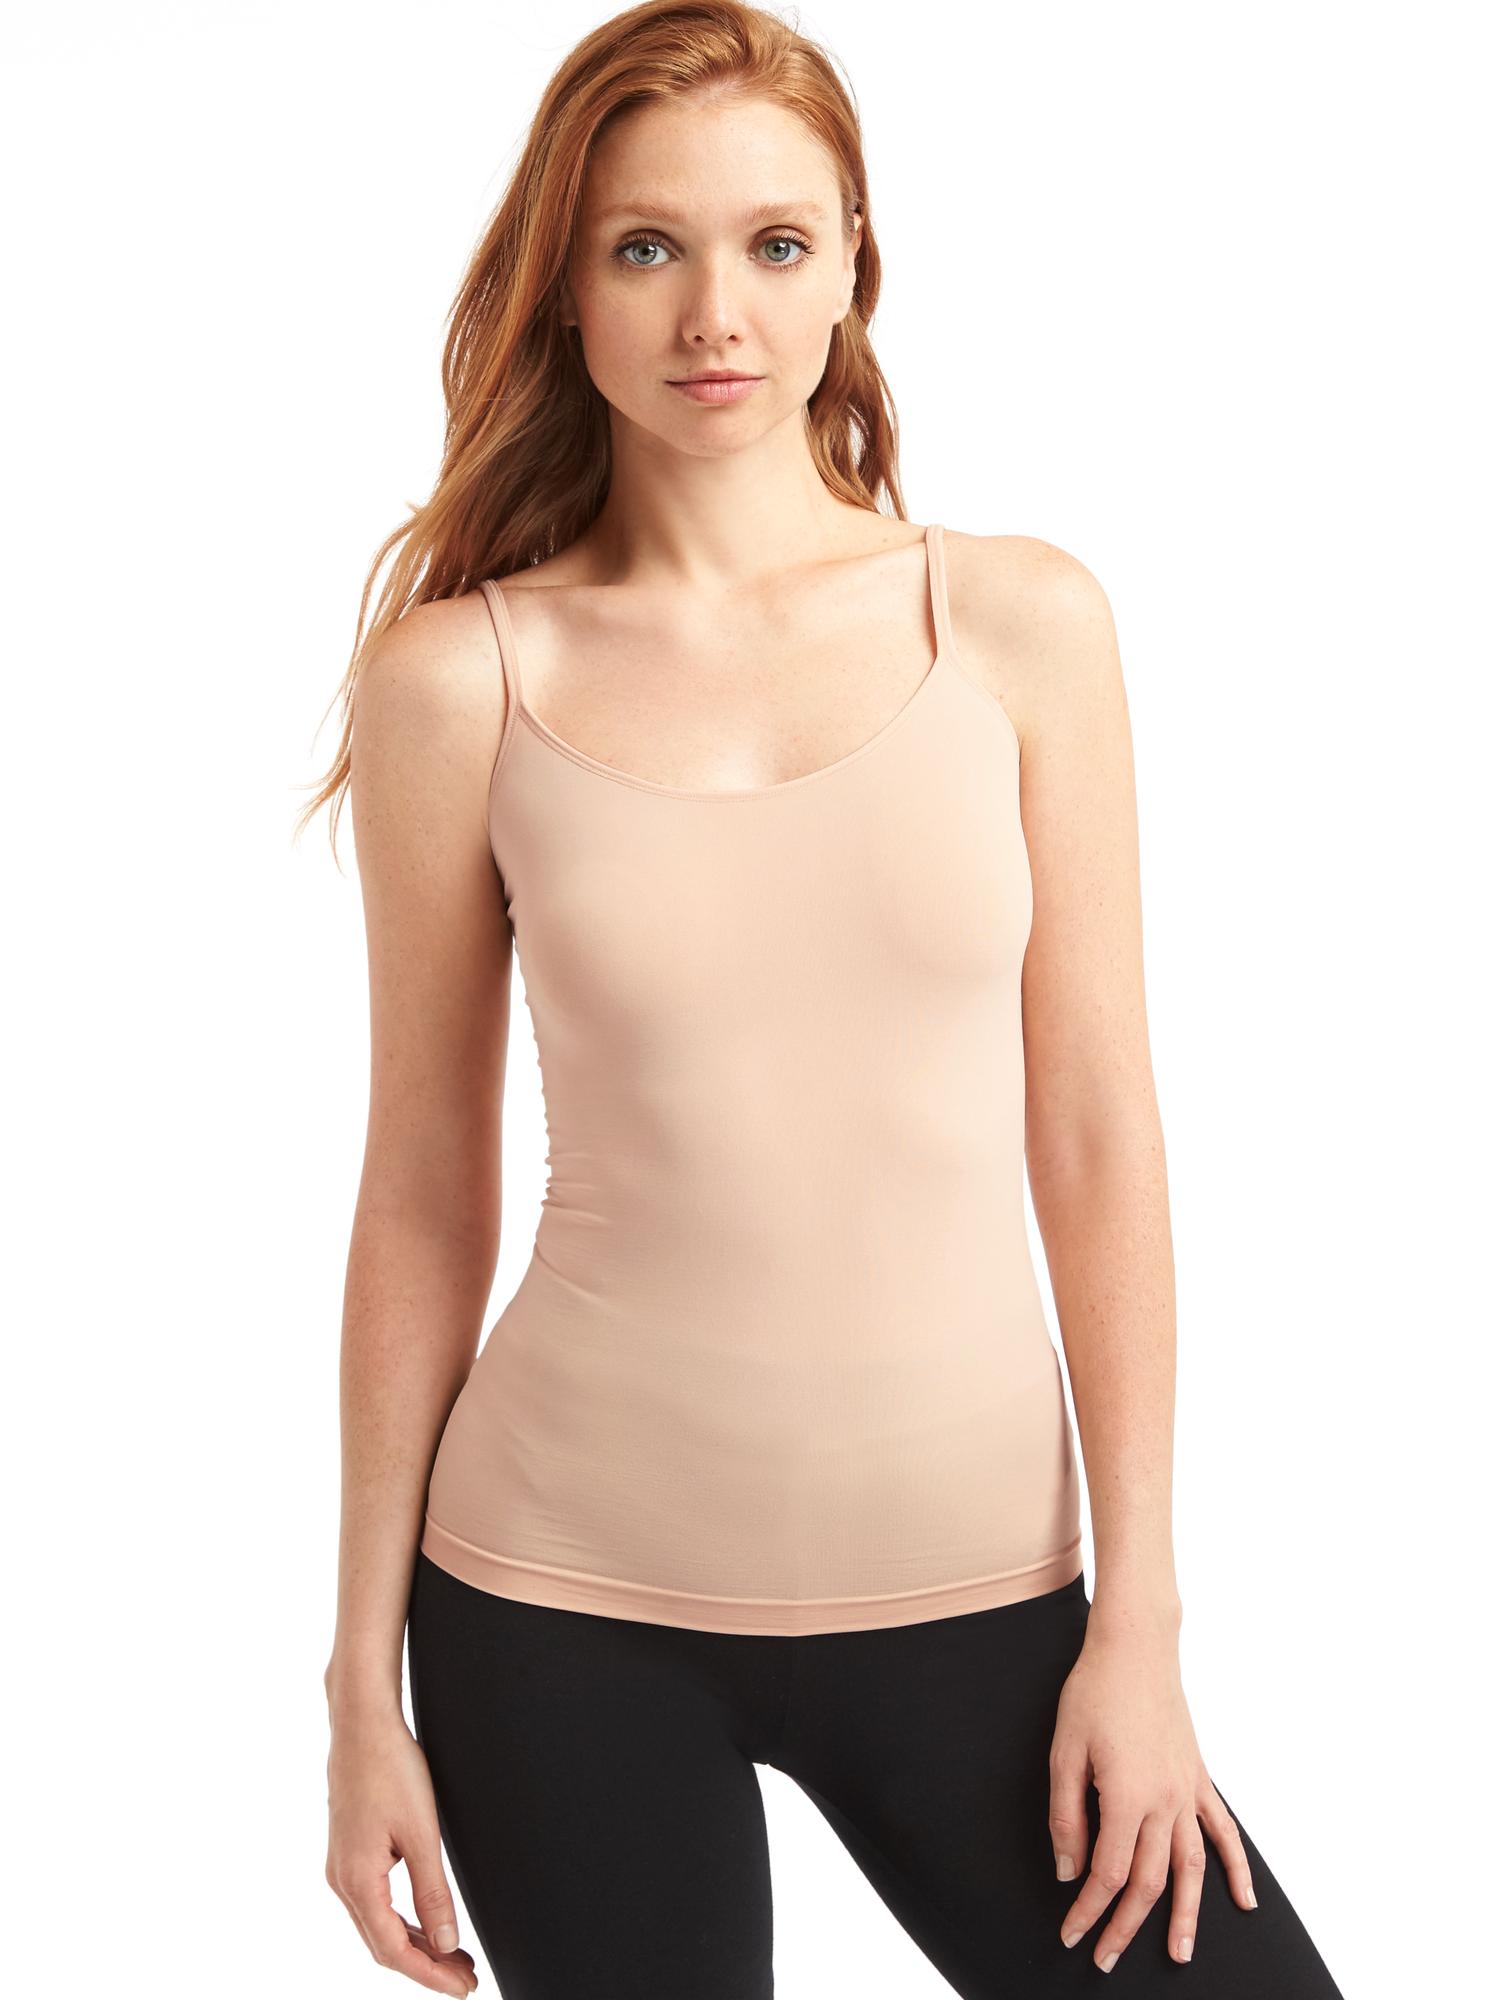 Body support cami